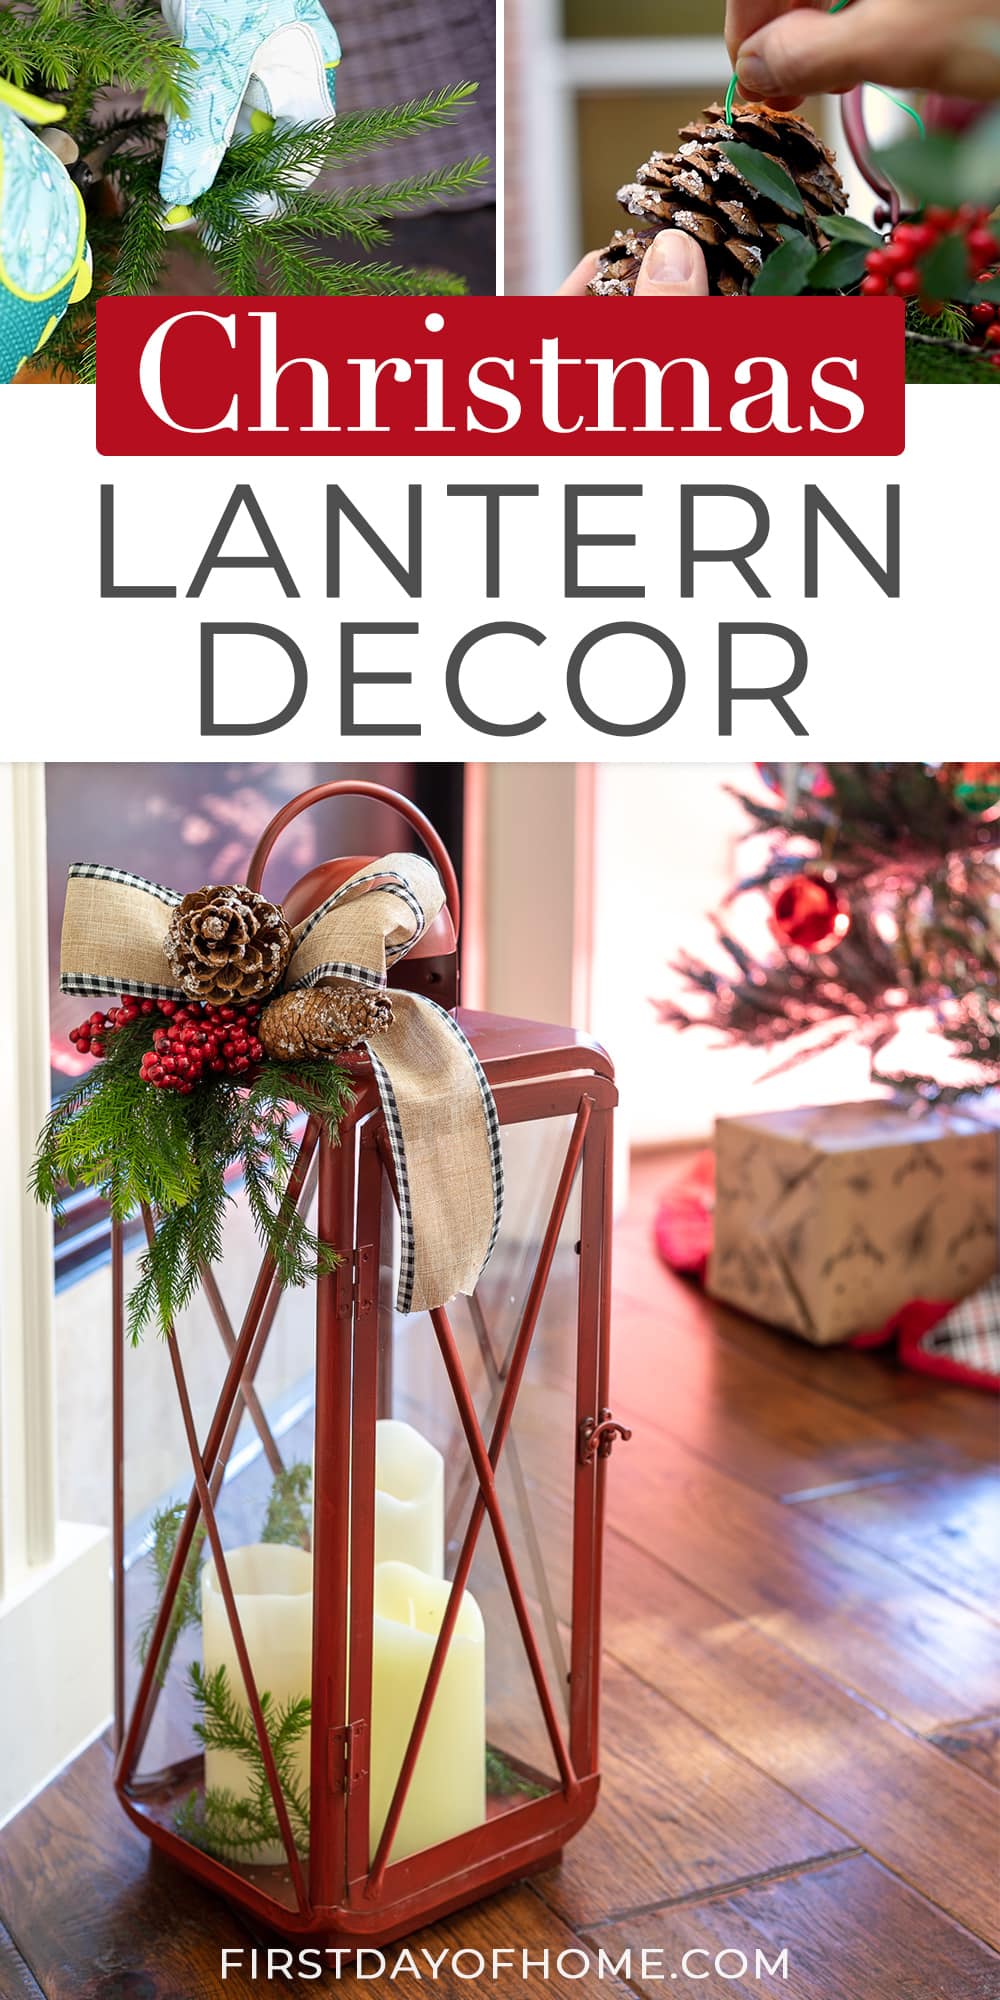 Collage of Christmas lantern decor and greenery and pinecones used to decorate the lantern. Text overlay reads "Christmas Lantern Decor"